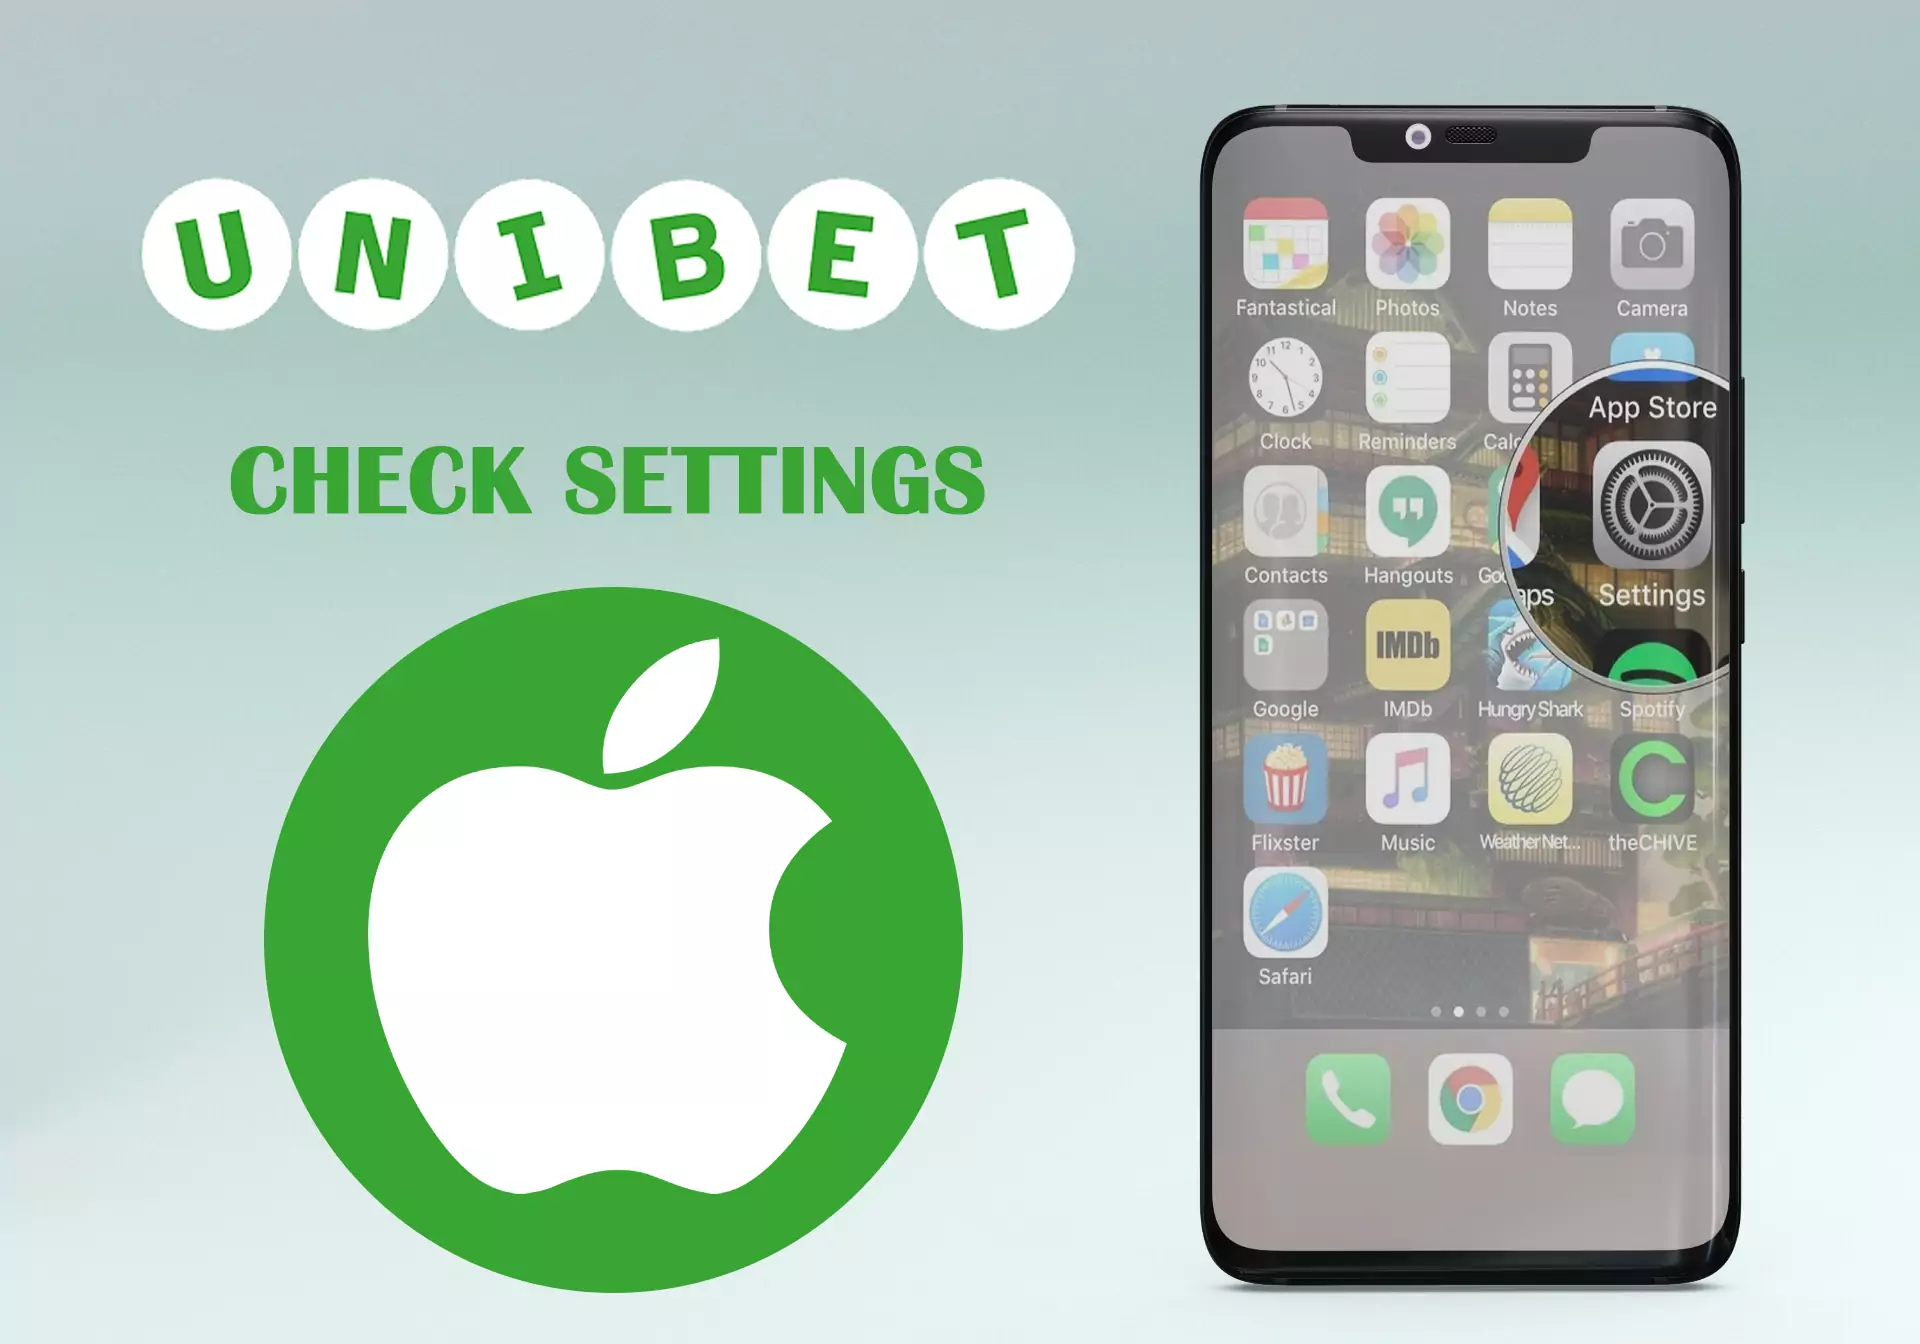 Check your iPhone settings and allow installation from unknown sources.